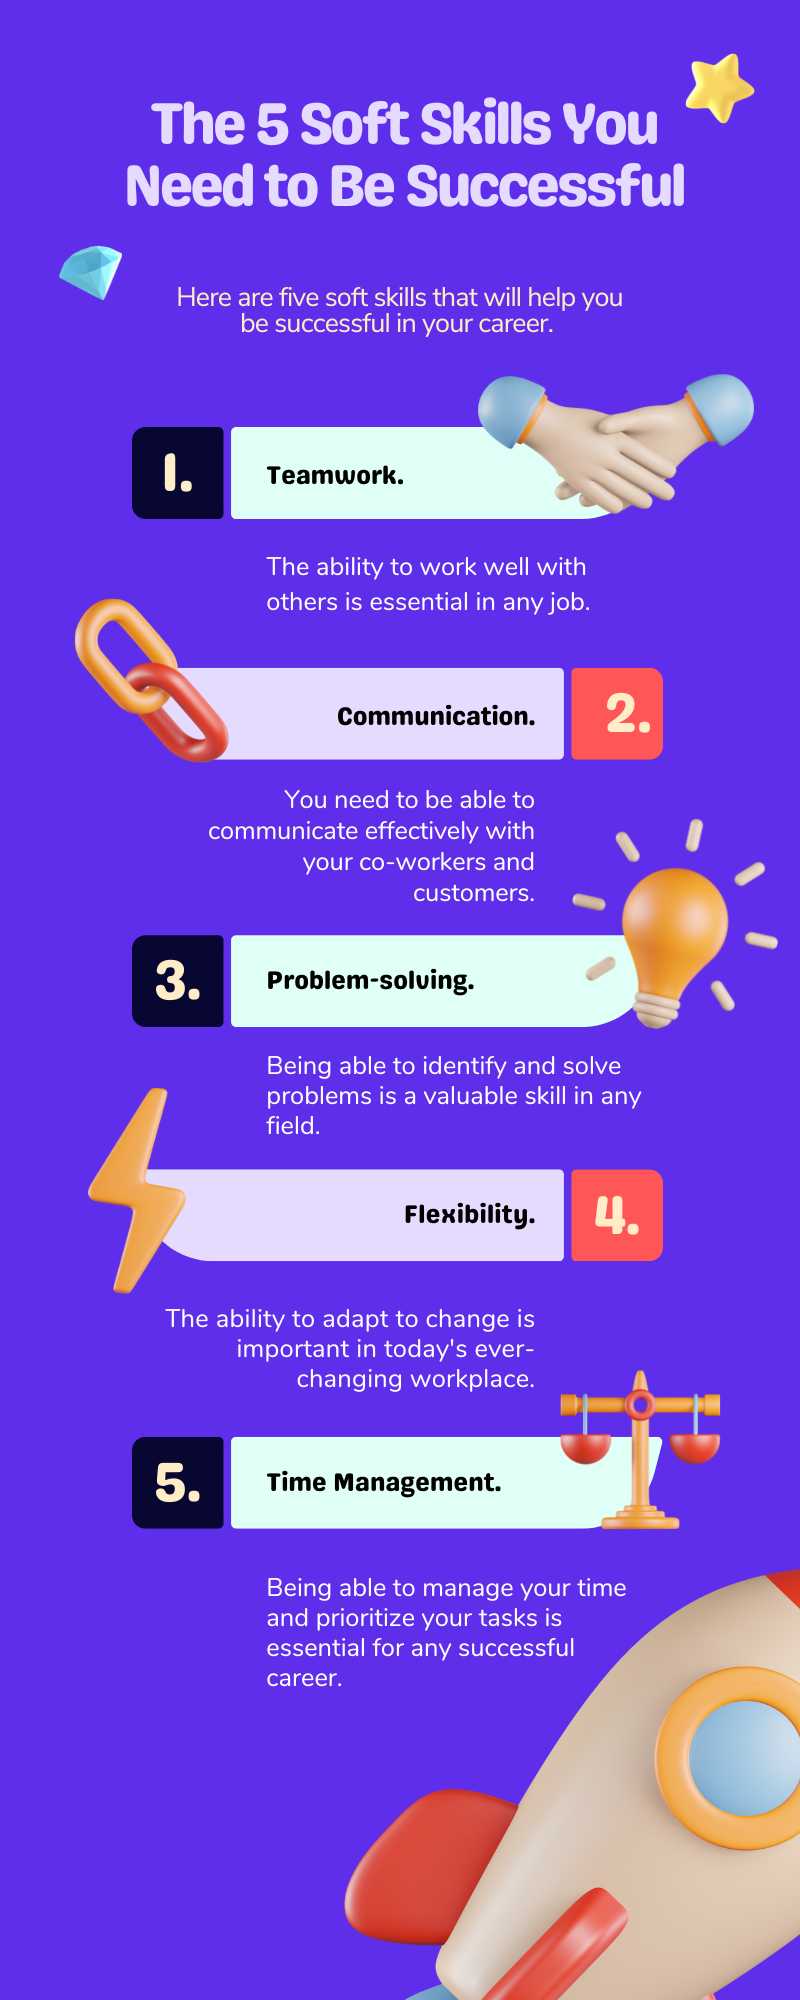 3D Soft Skills You Need to Be Successful Infographic